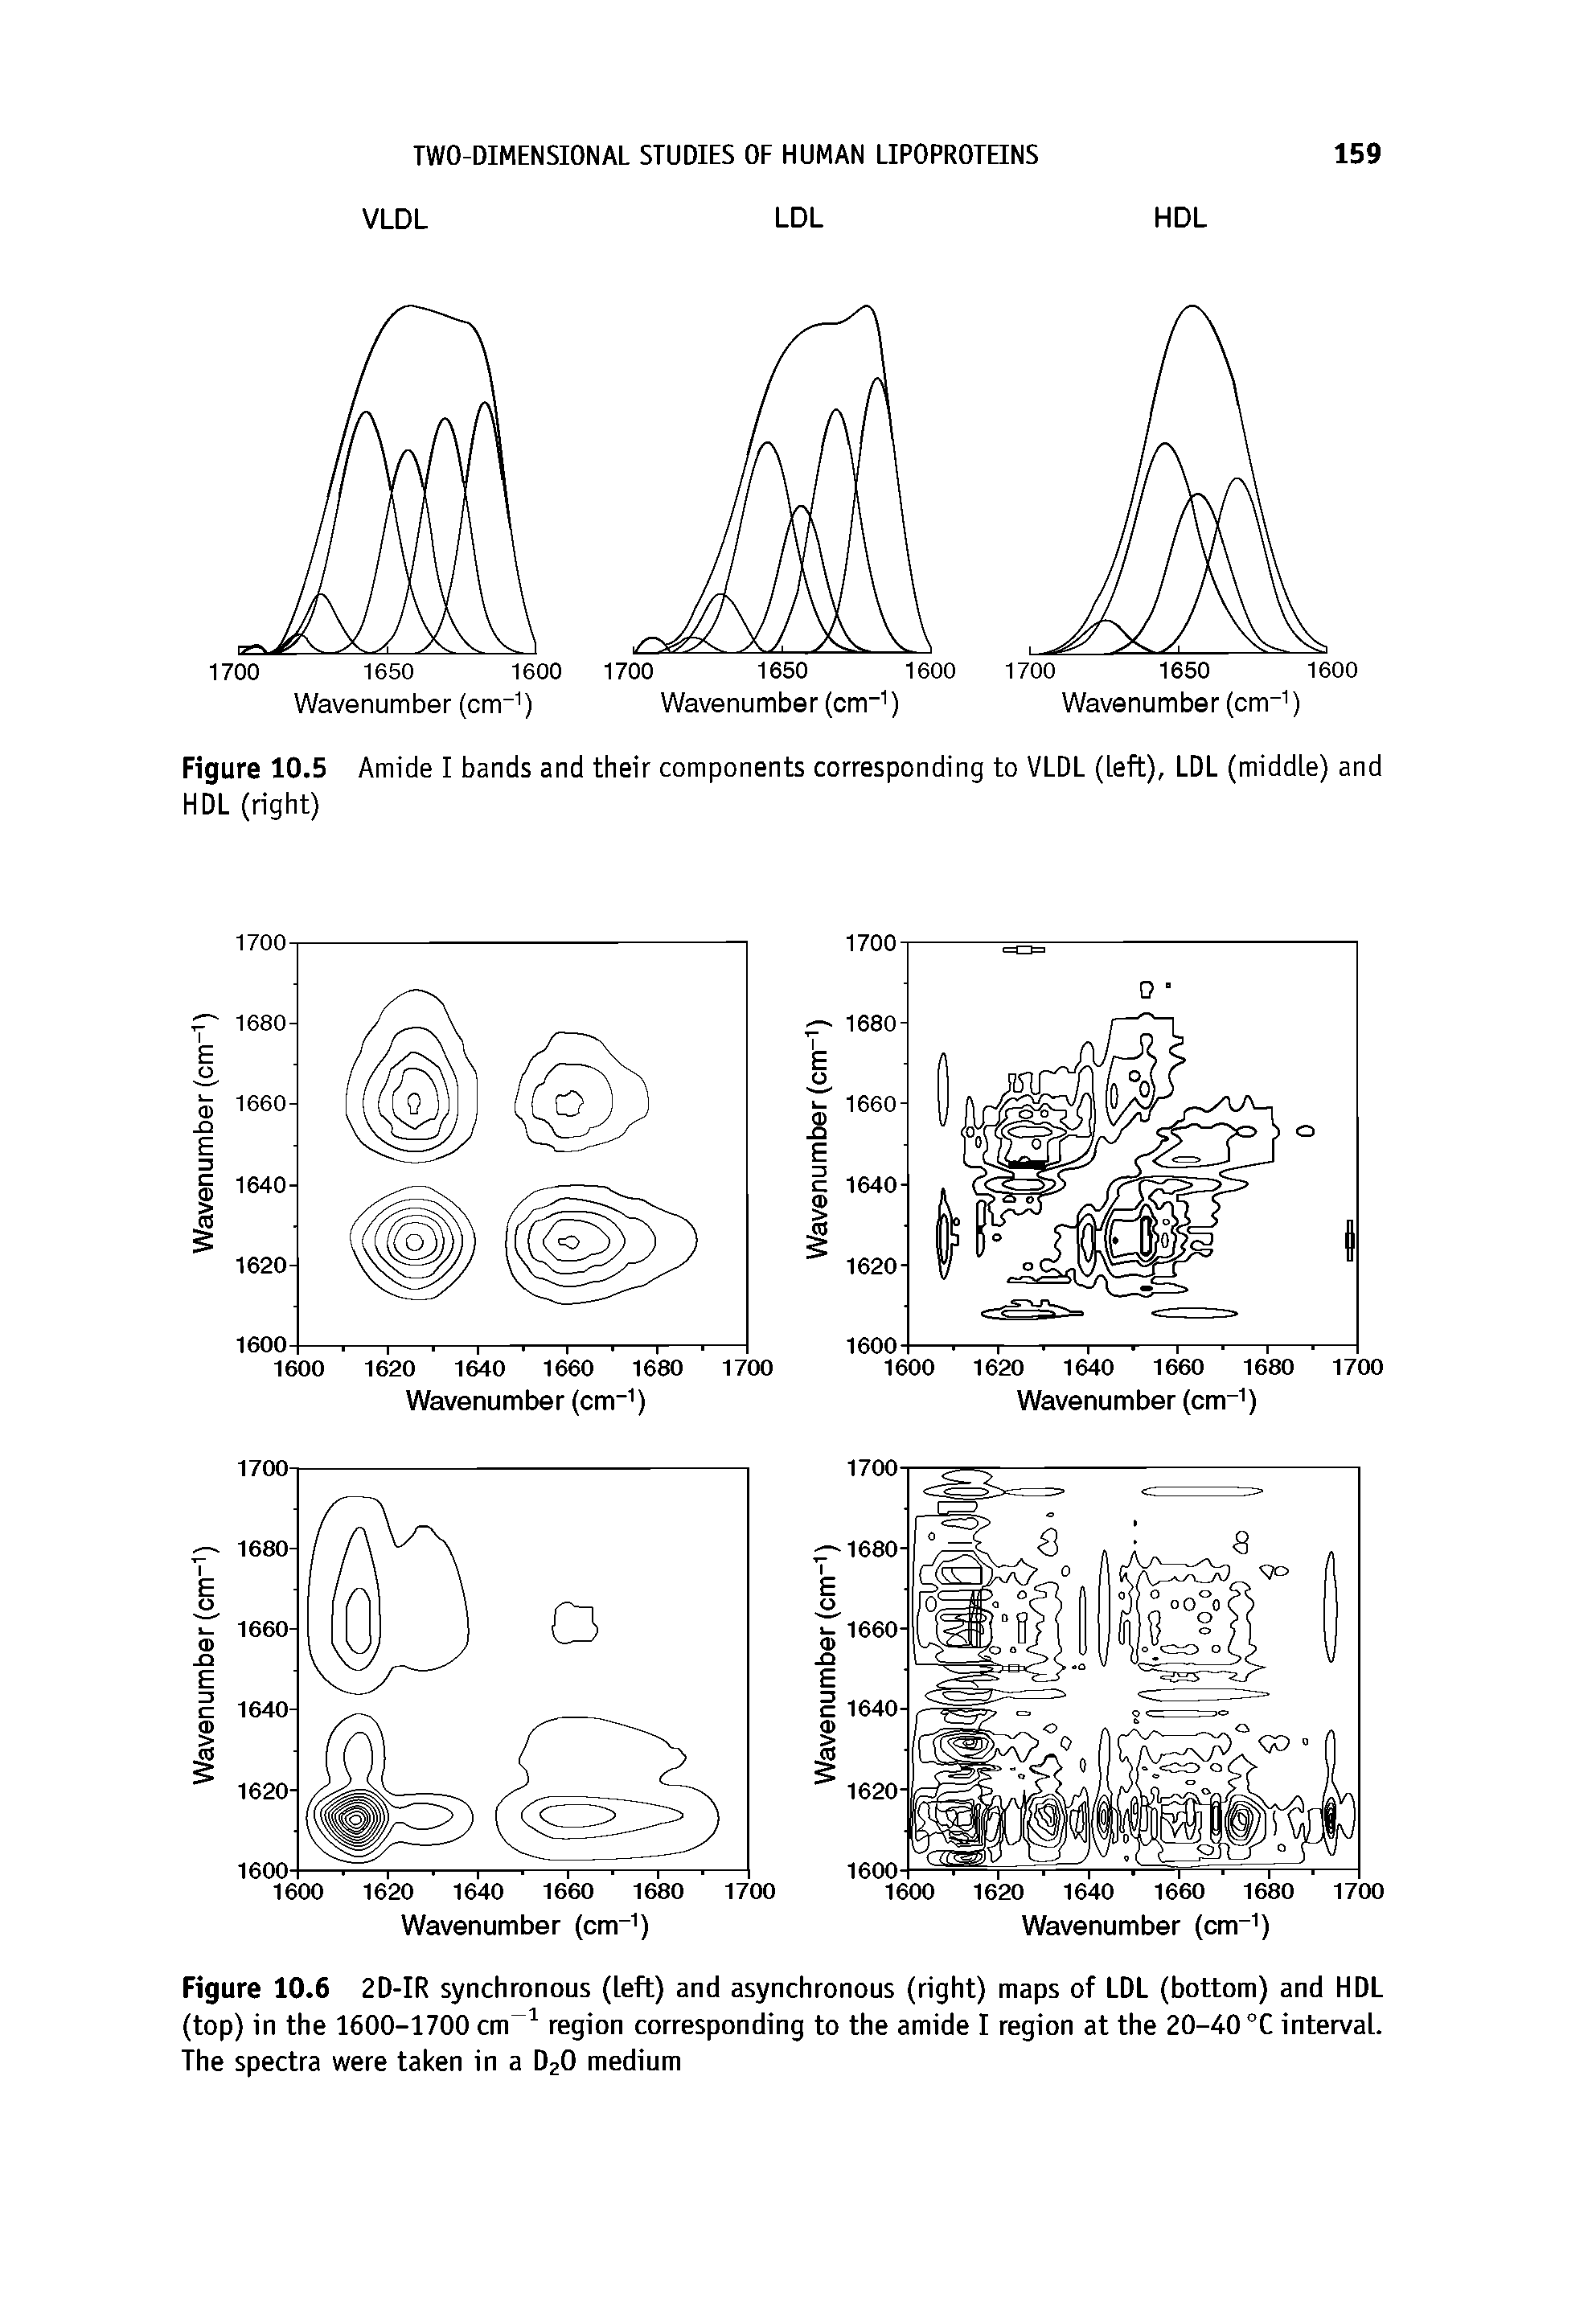 Figure 10.6 2D-IR synchronous (left) and asynchronous (right) maps of LDL (bottom) and HDL (top) in the 1600-1700 cm region corresponding to the amide I region at the 20-40 °C interval. The spectra were taken in a D2O medium...